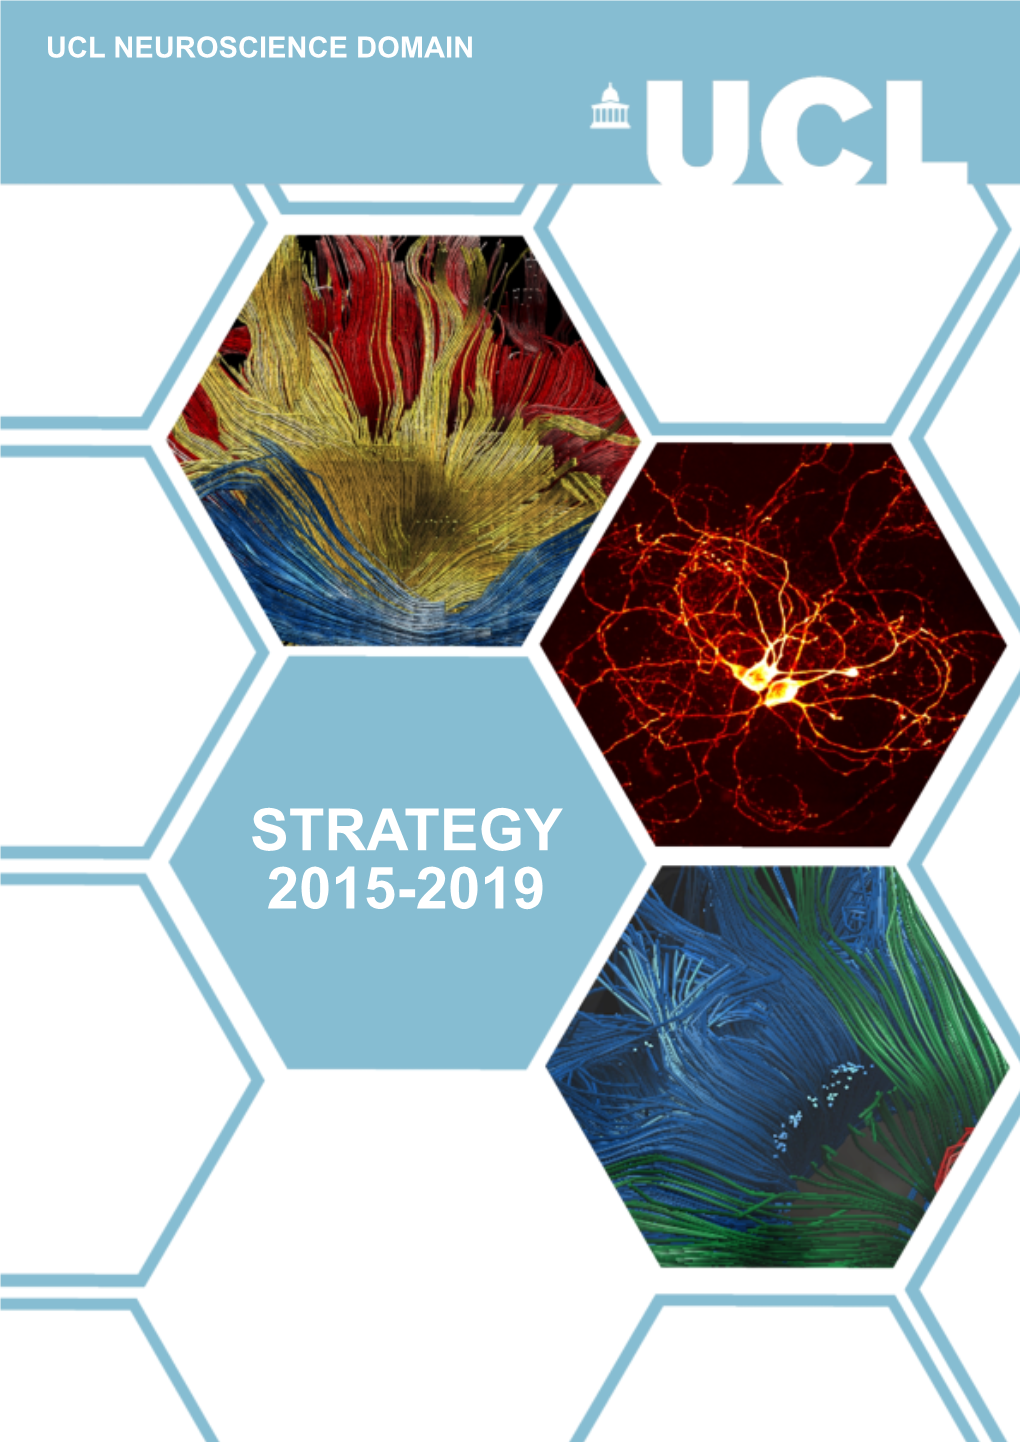 Strategy 201 5-201 9